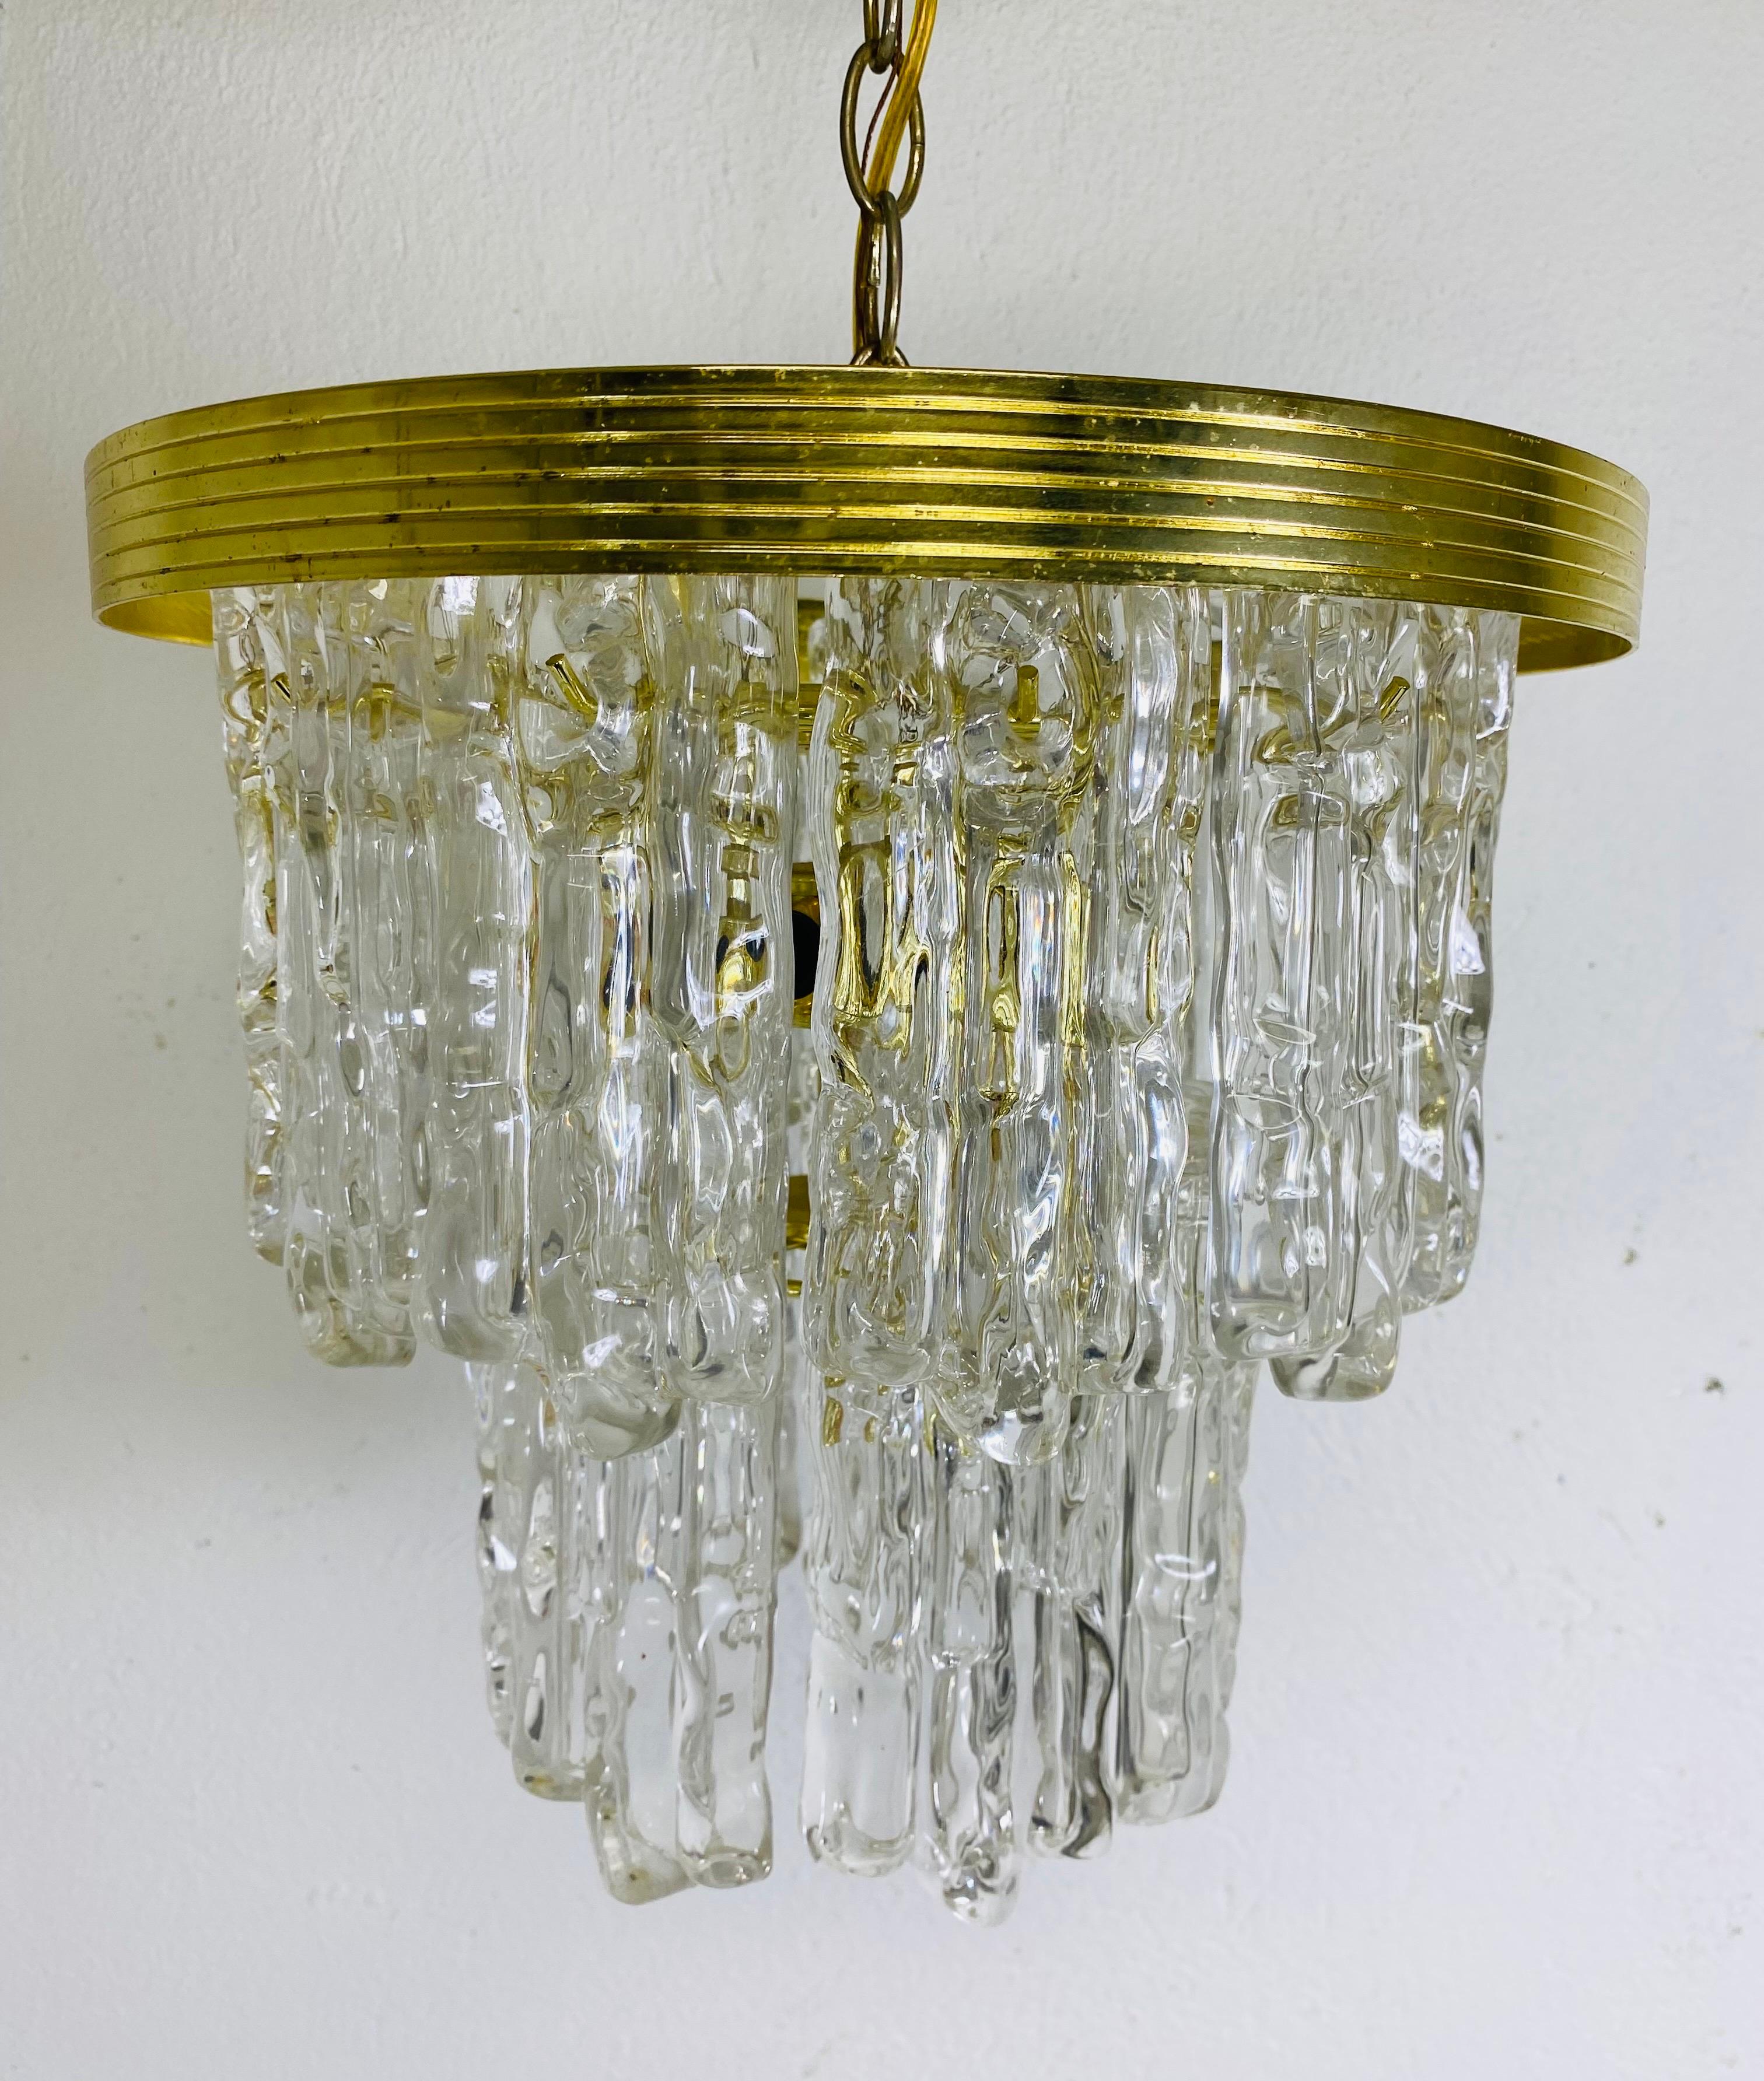 Vintage Mid-Century Modern Lucite and Brass Waterfall Style Chandelier In Good Condition For Sale In Allentown, PA